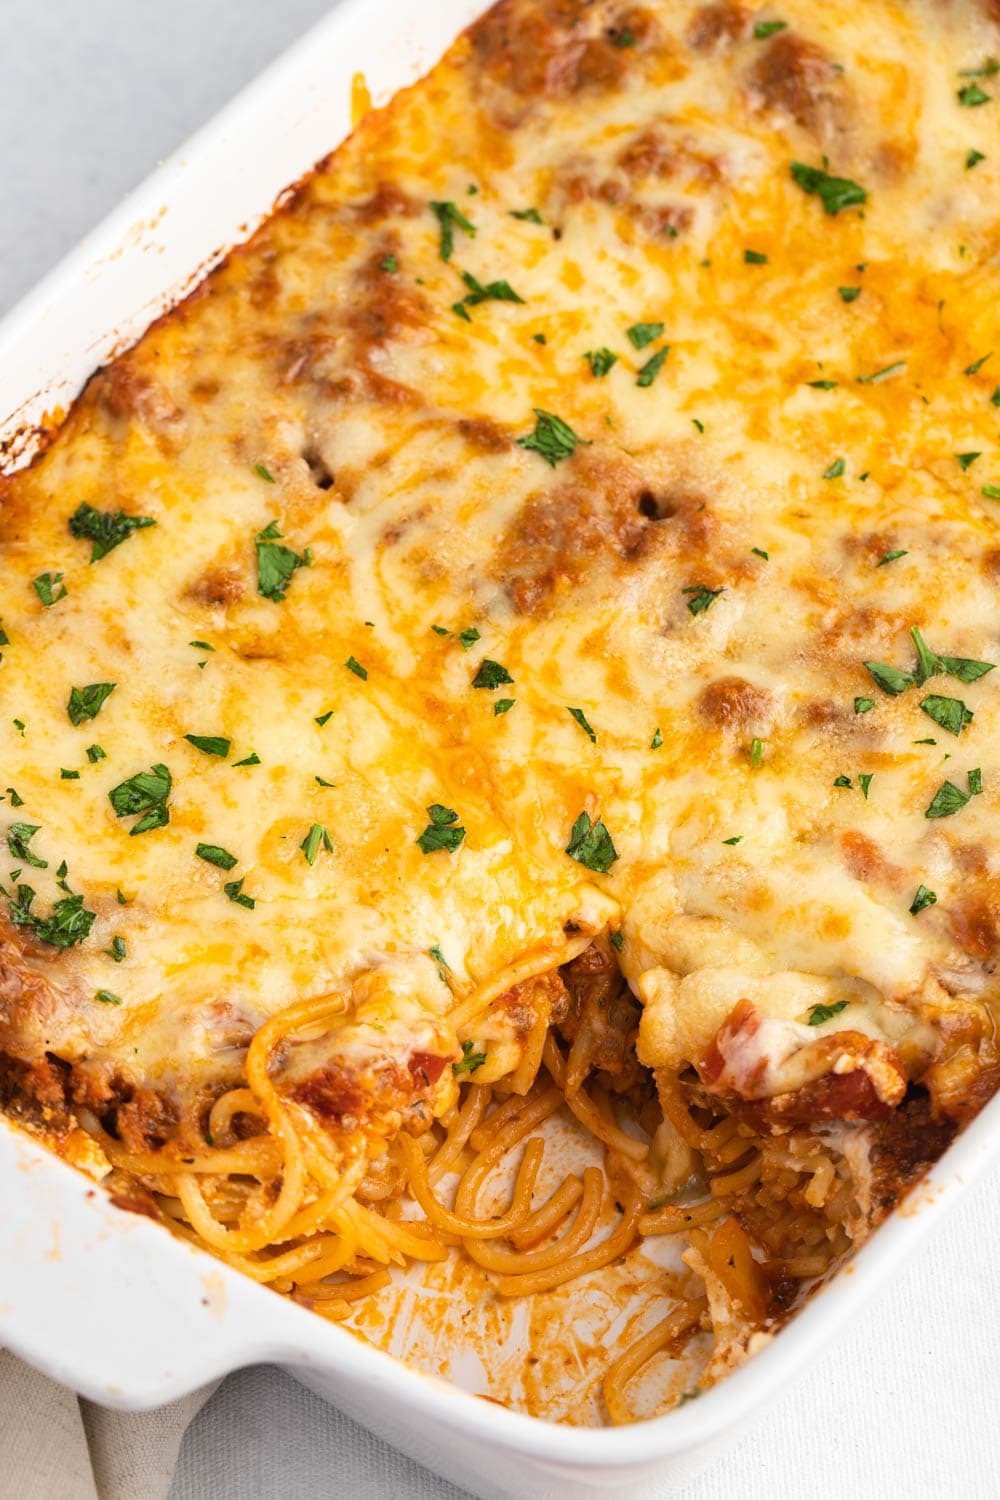 Portion Sliced Homemade Million Dollar Spaghetti with Cheese and Herbs on a White Baking Dish